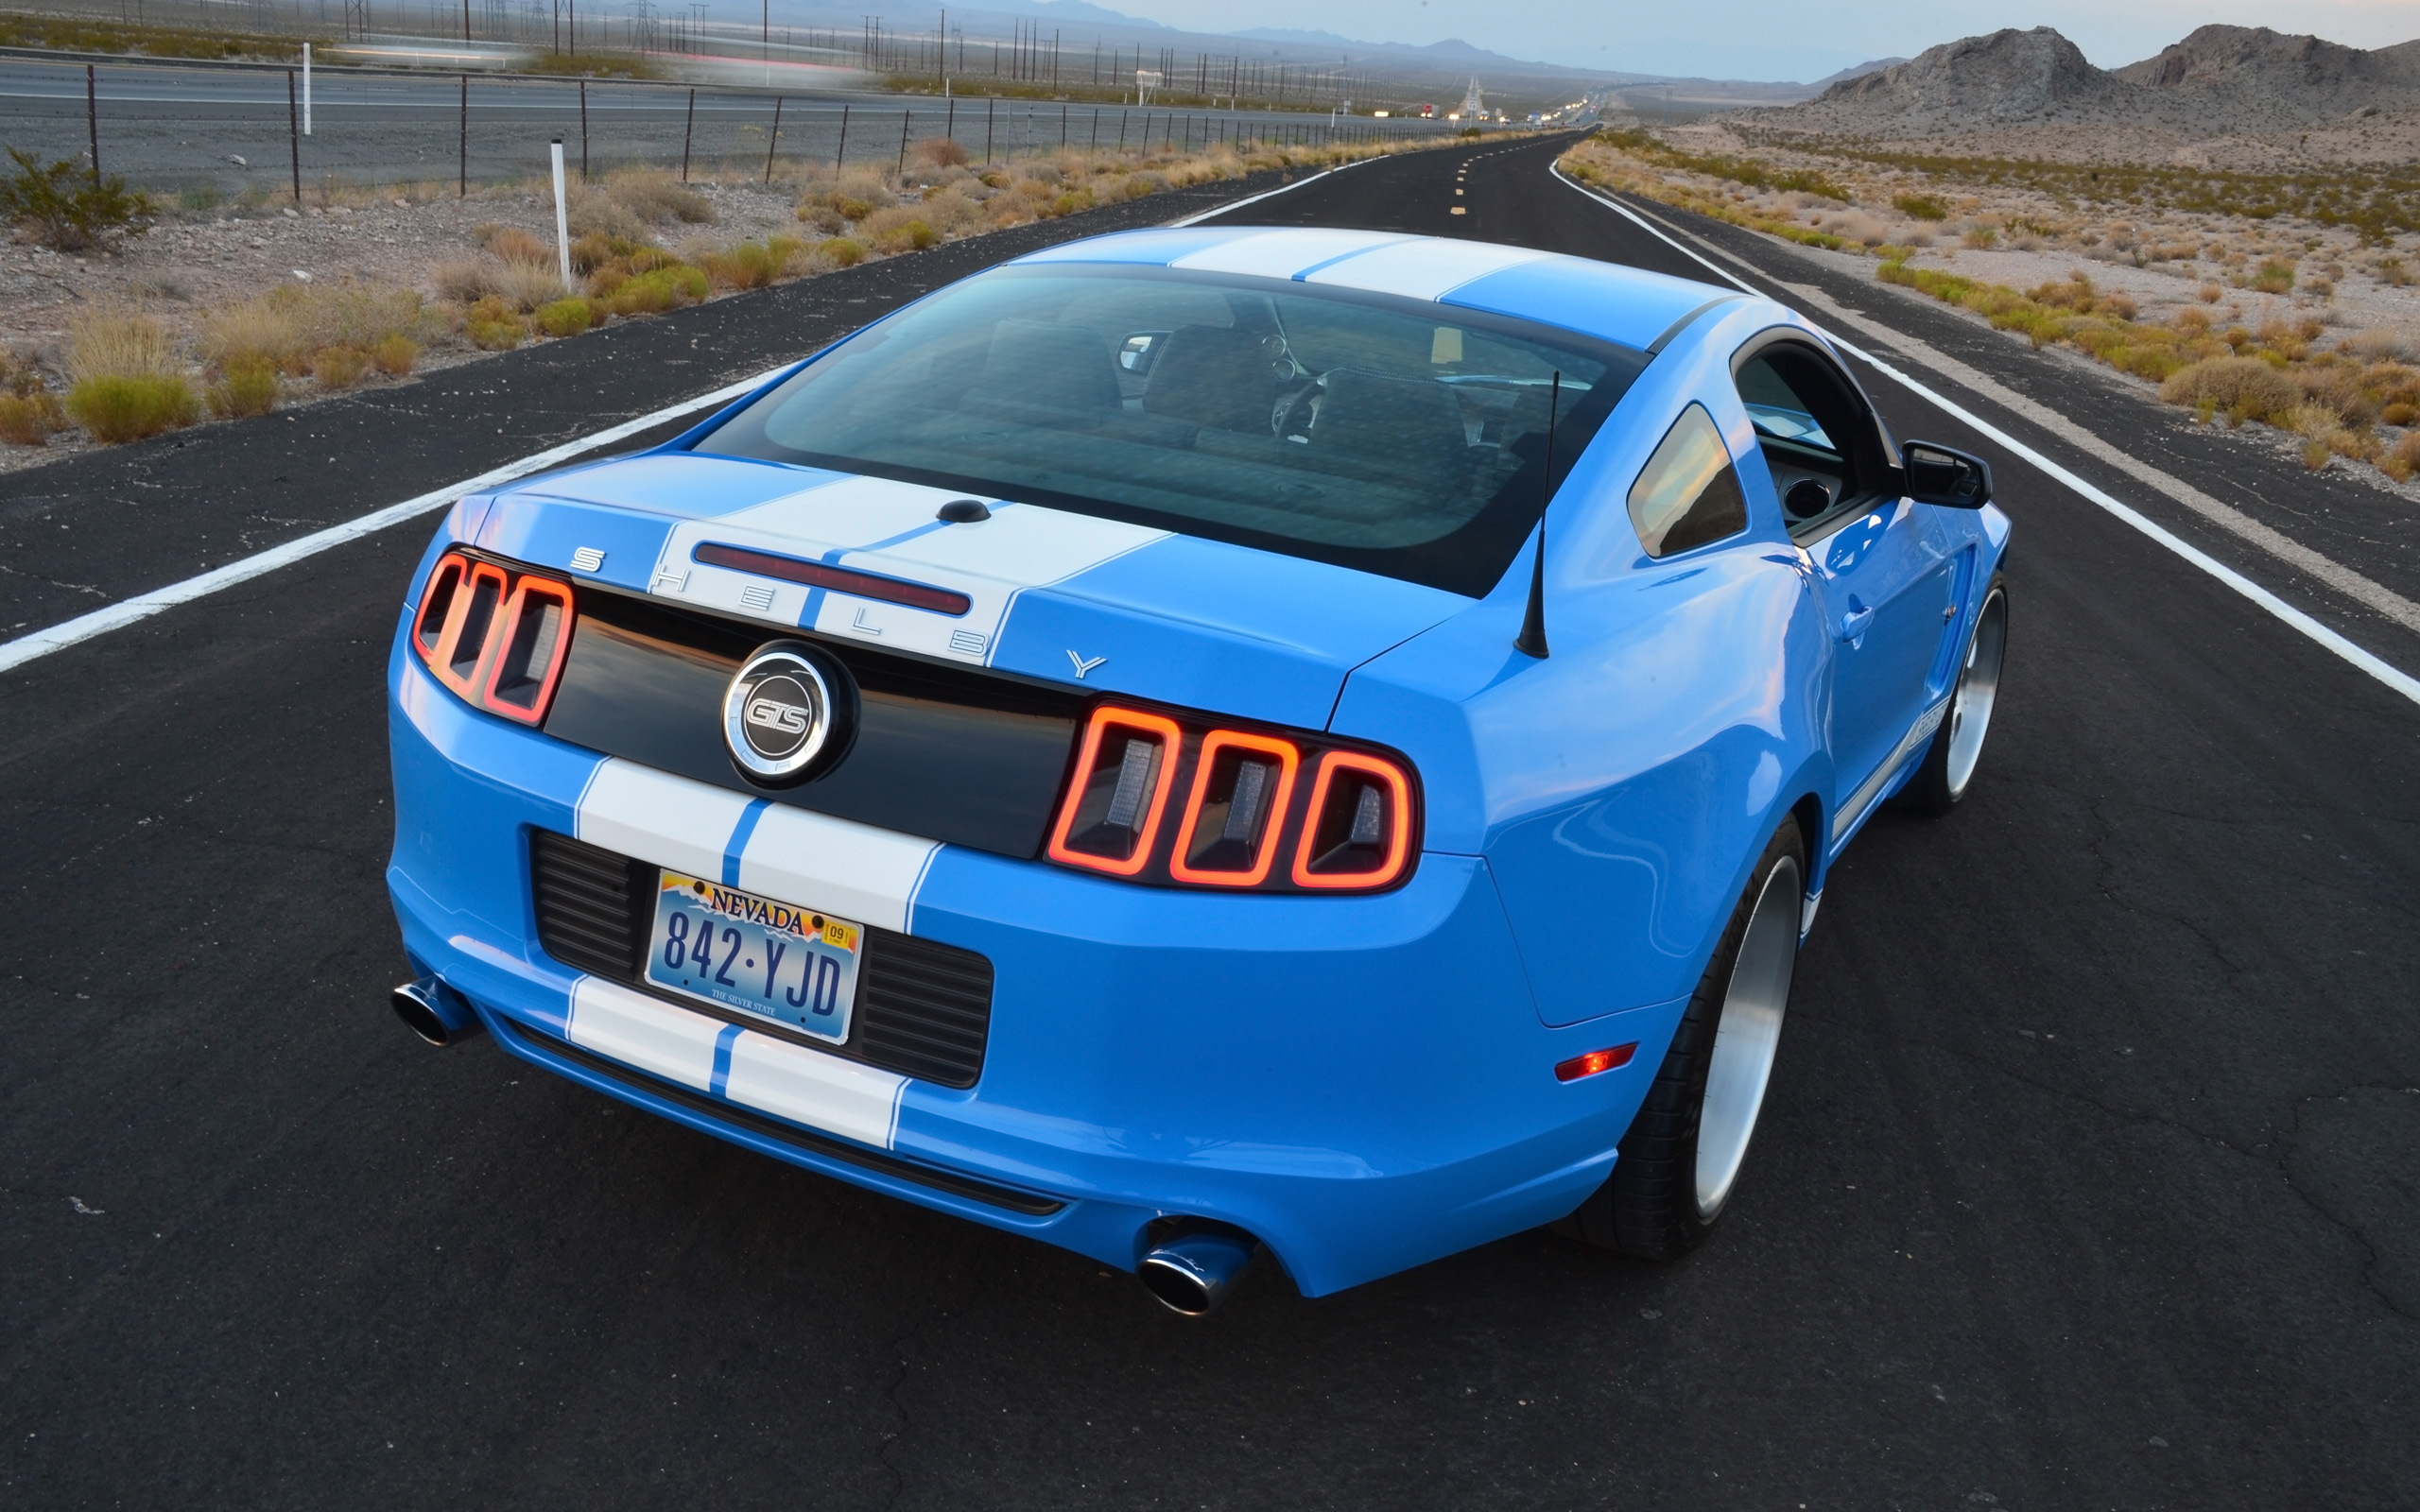 2013, Shelby, Gts, Ford, Mustang, Muscle, Supercar, He Wallpaper